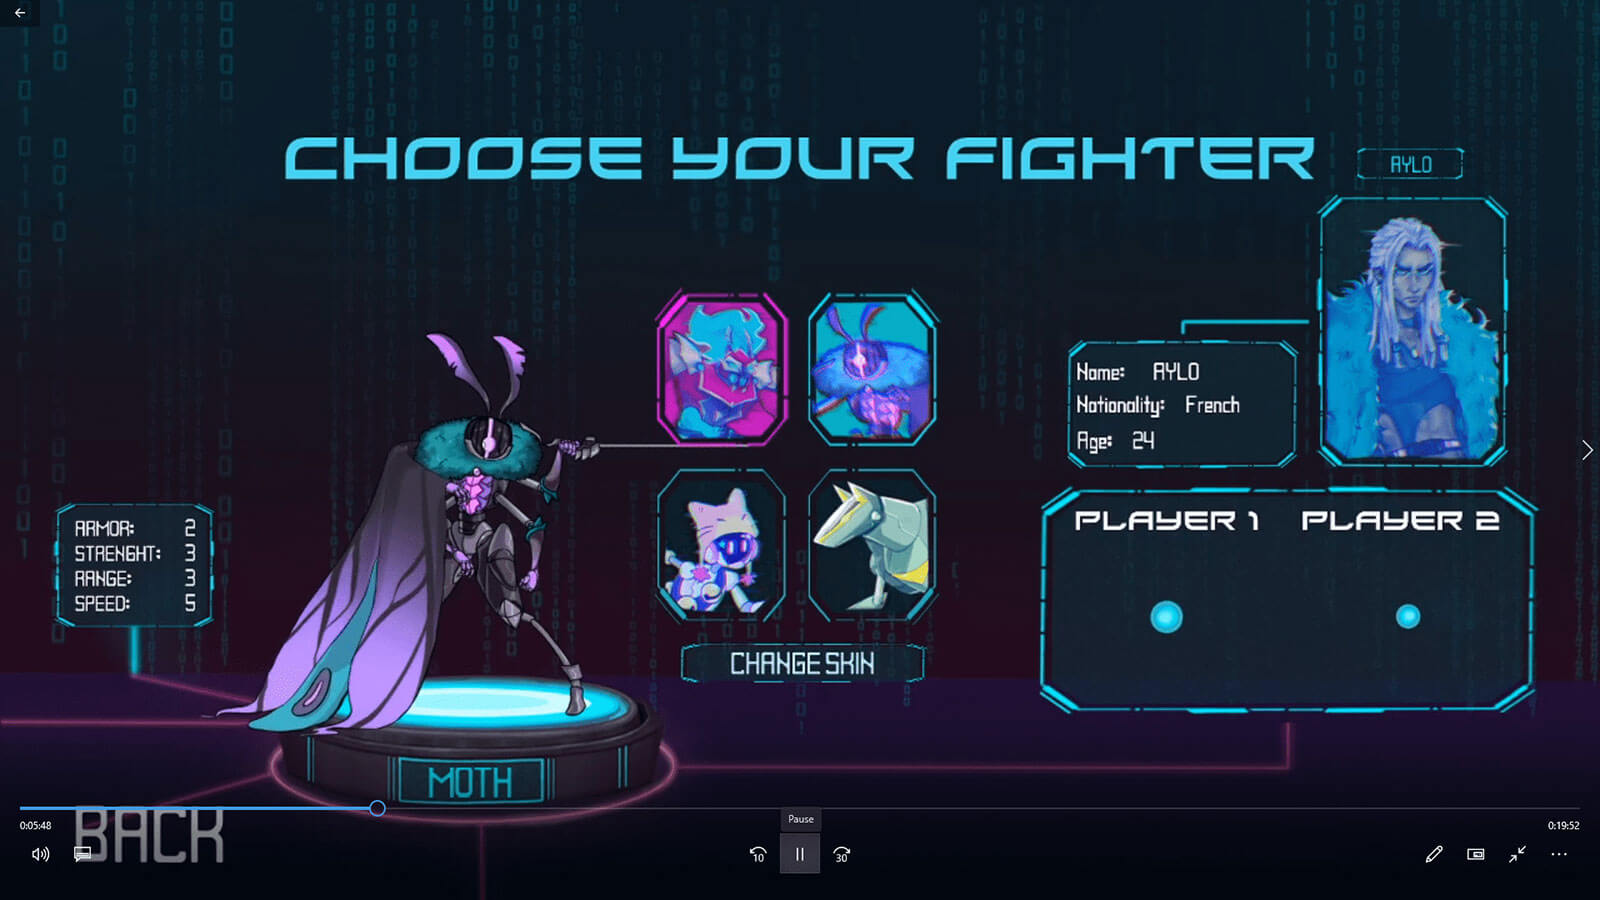 Player selection screen displaying a podium with the player and their characteristics.